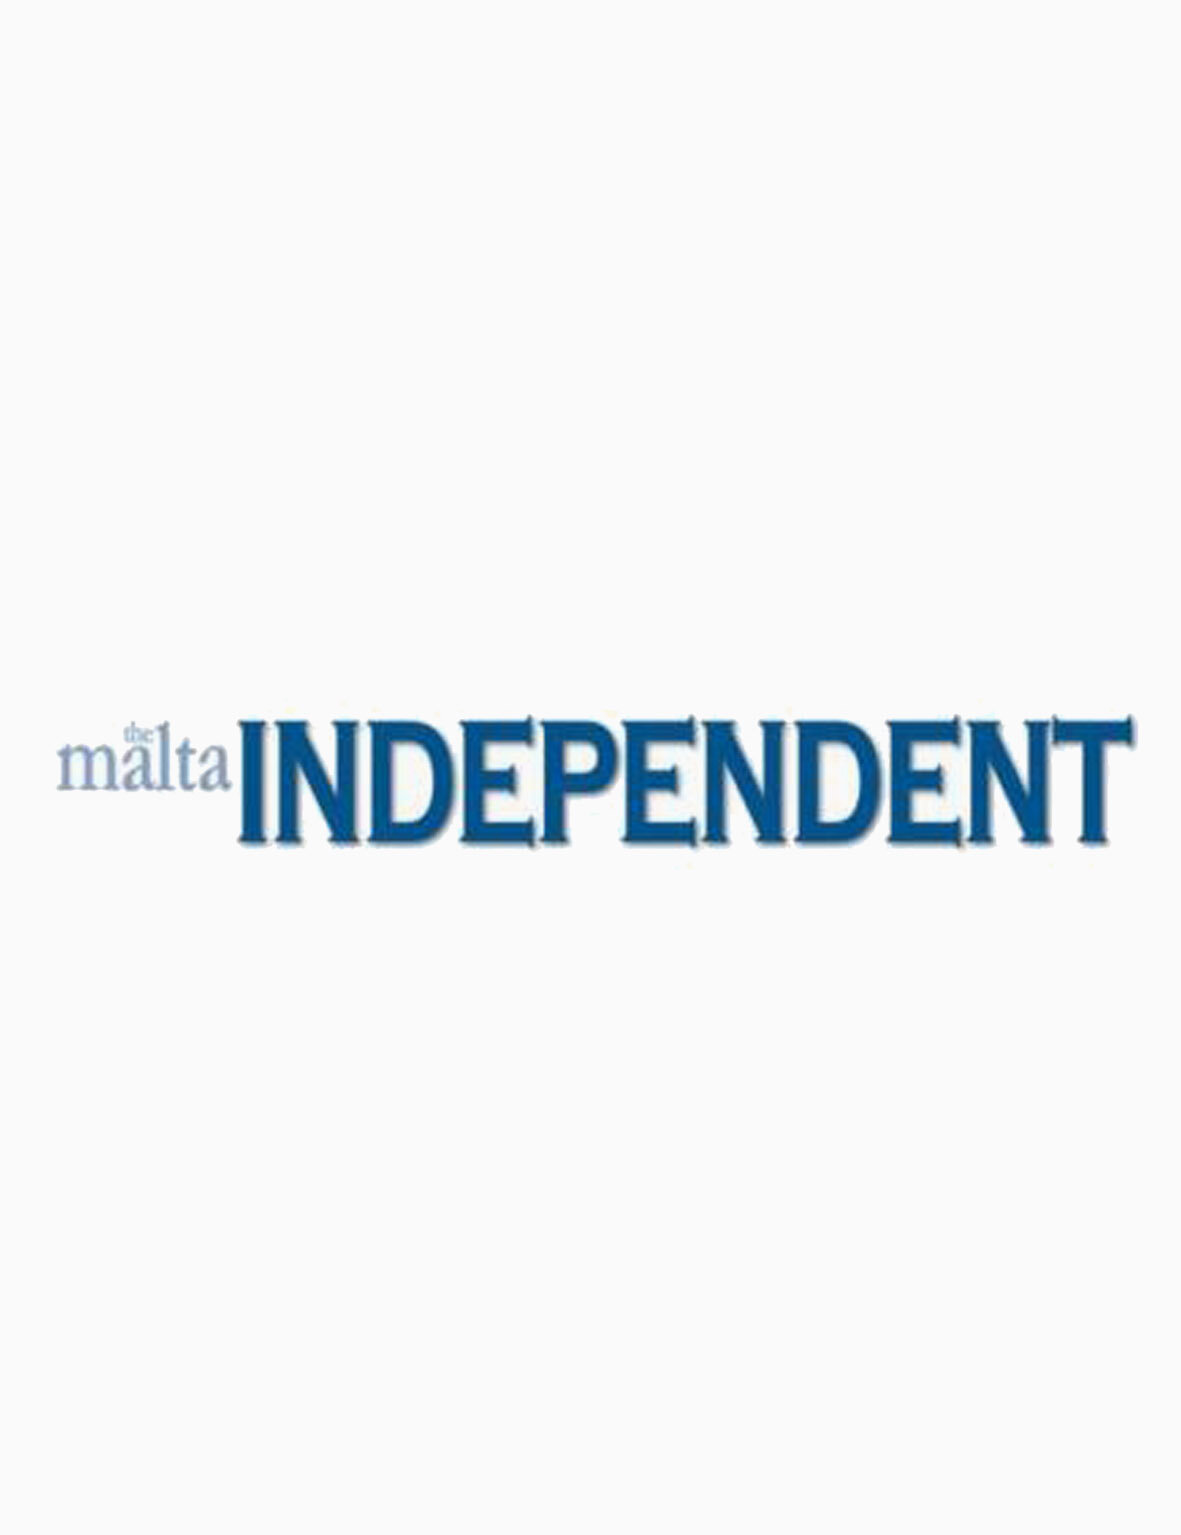 MALTA INDEPENDENT, MAY 2012